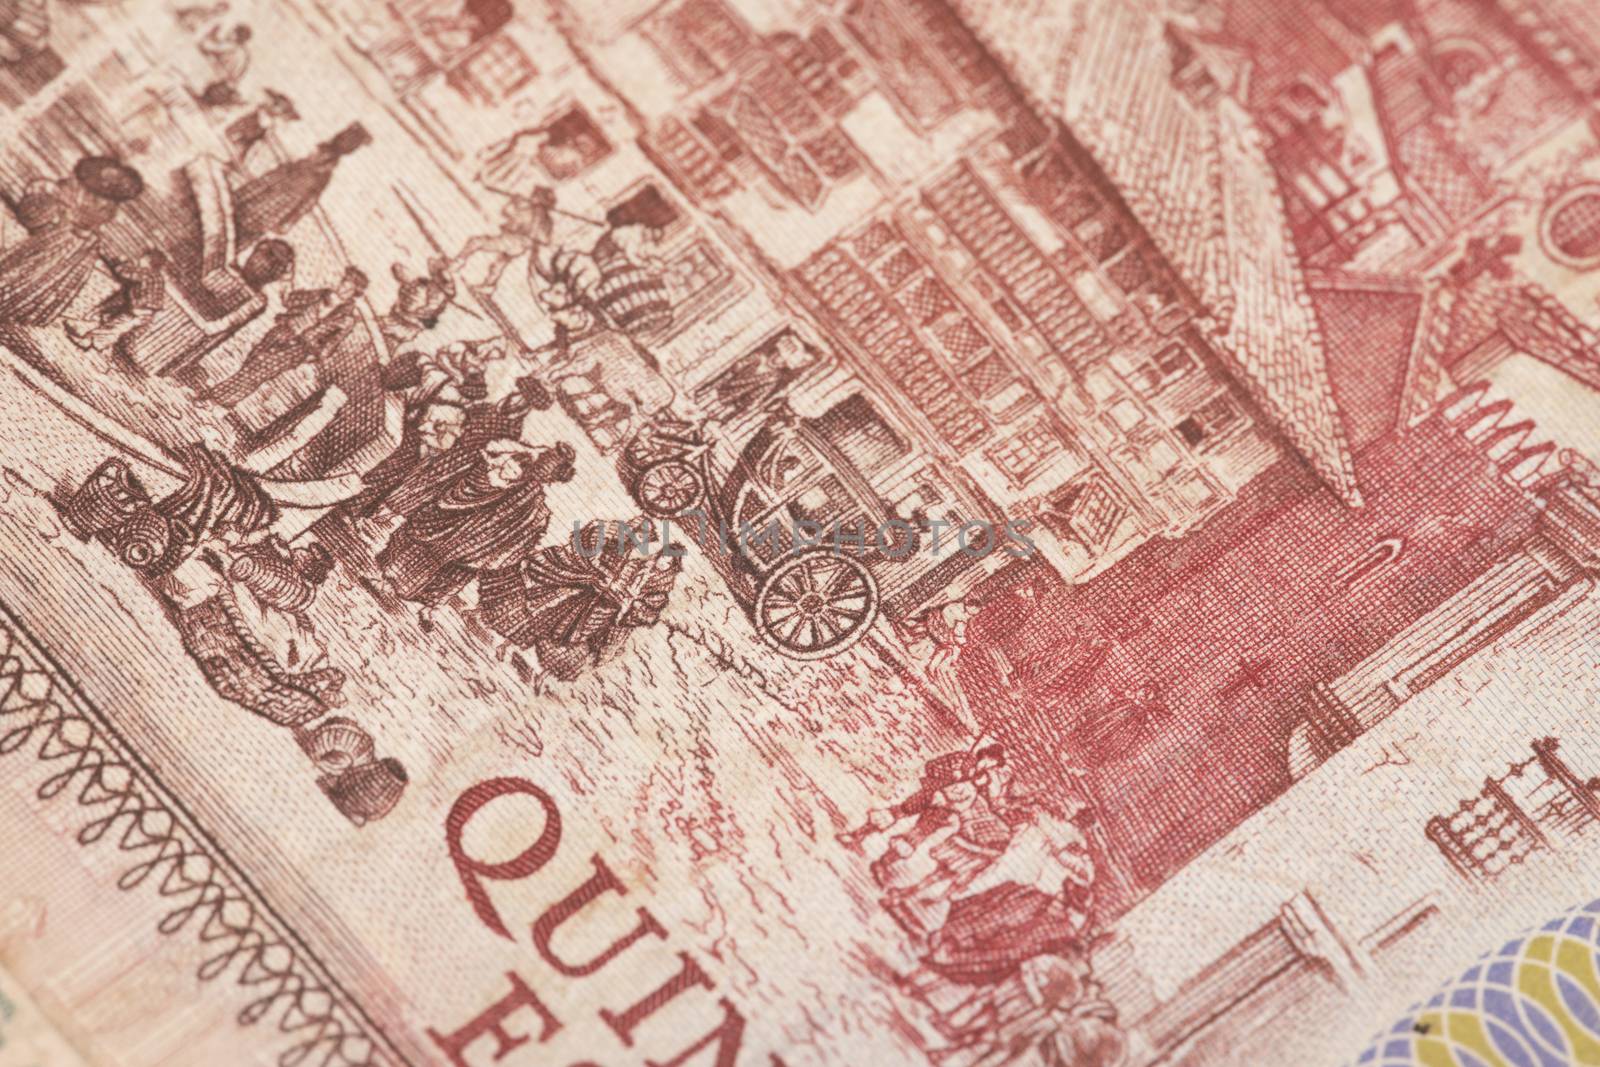 Very close up of obsolete bank note detail.